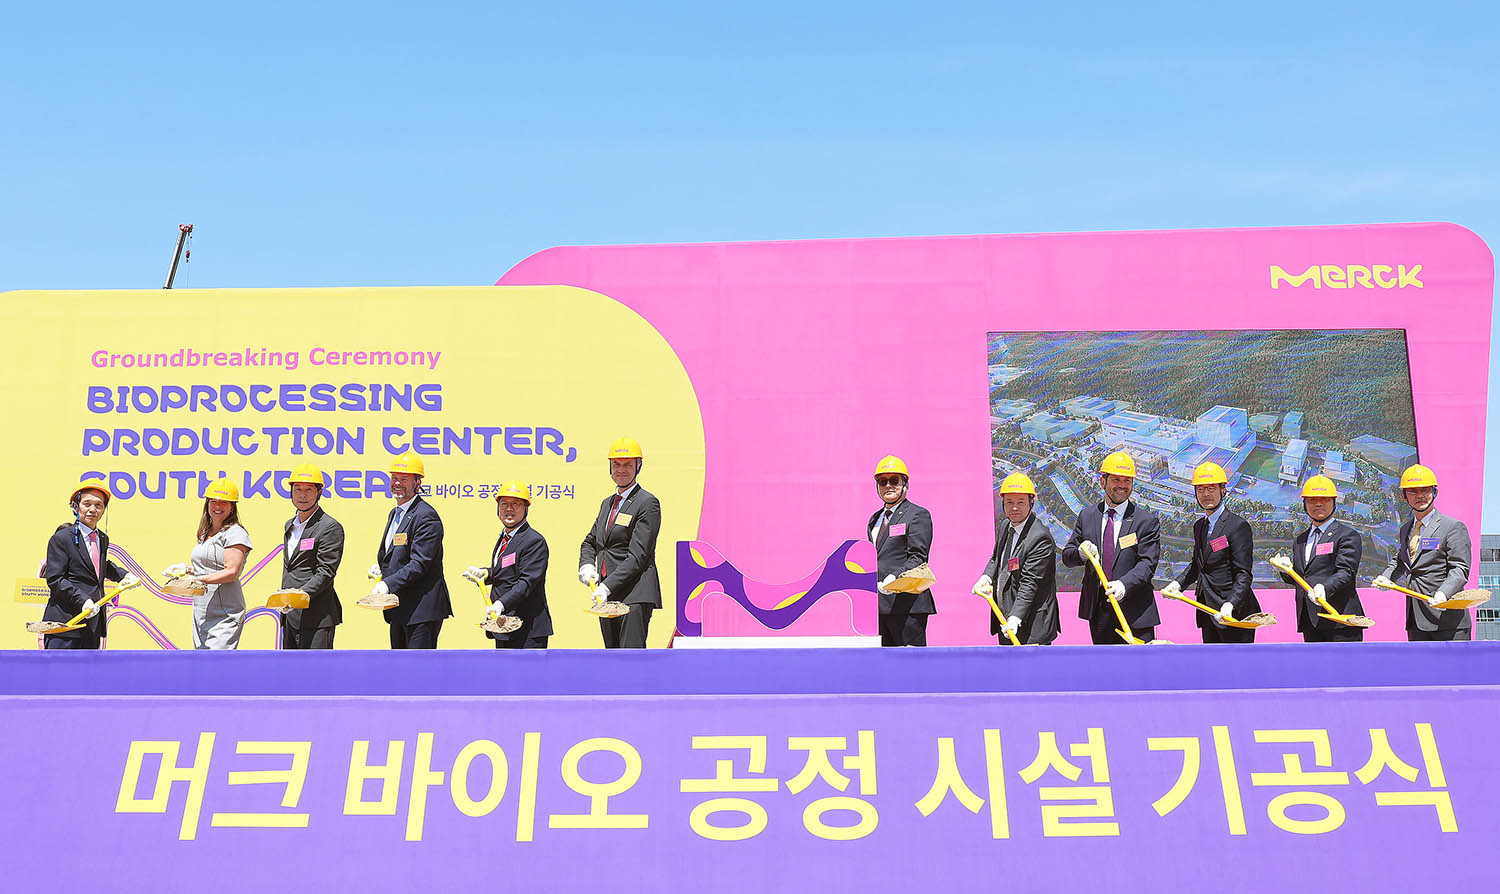 Trade Minister attends groundbreaking ceremony for Merck's Bioprocessing Production Center 